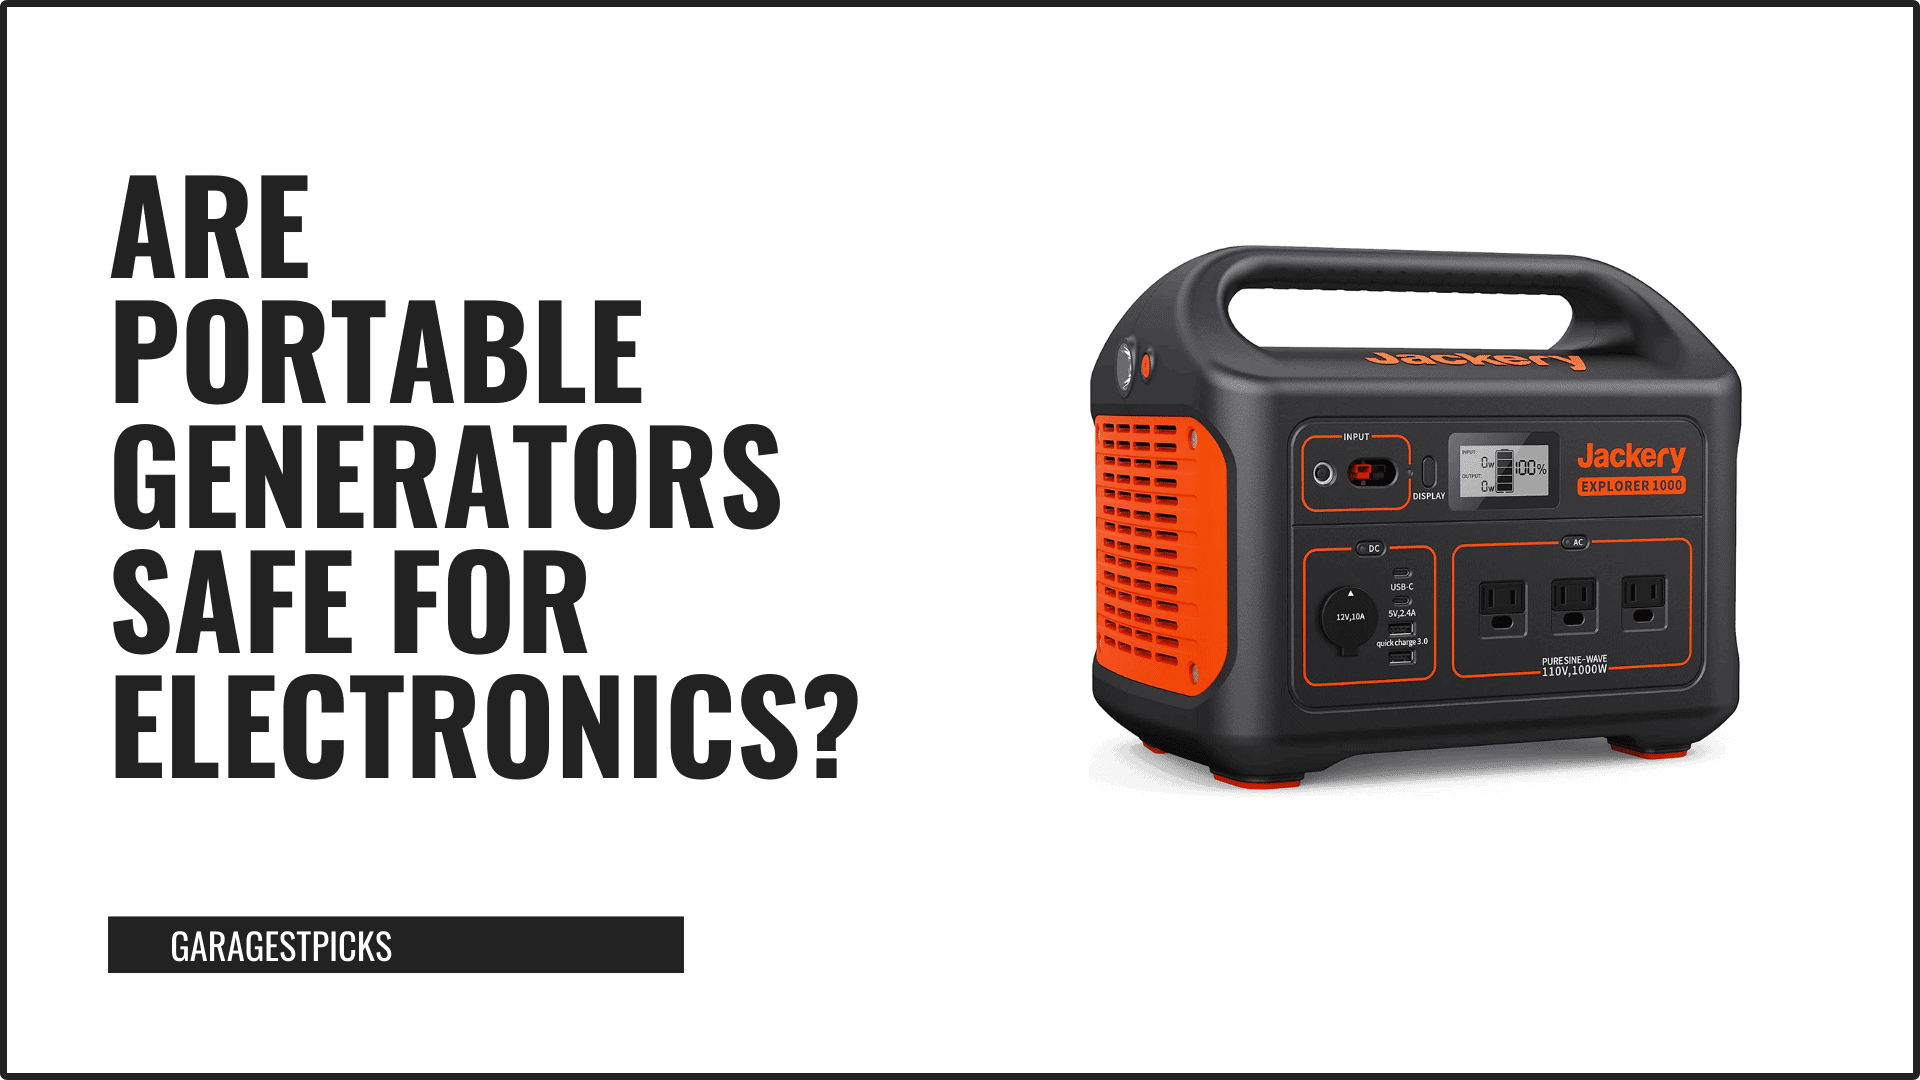 Are portable generators safe for electronics in black text on white background with image of portable generator